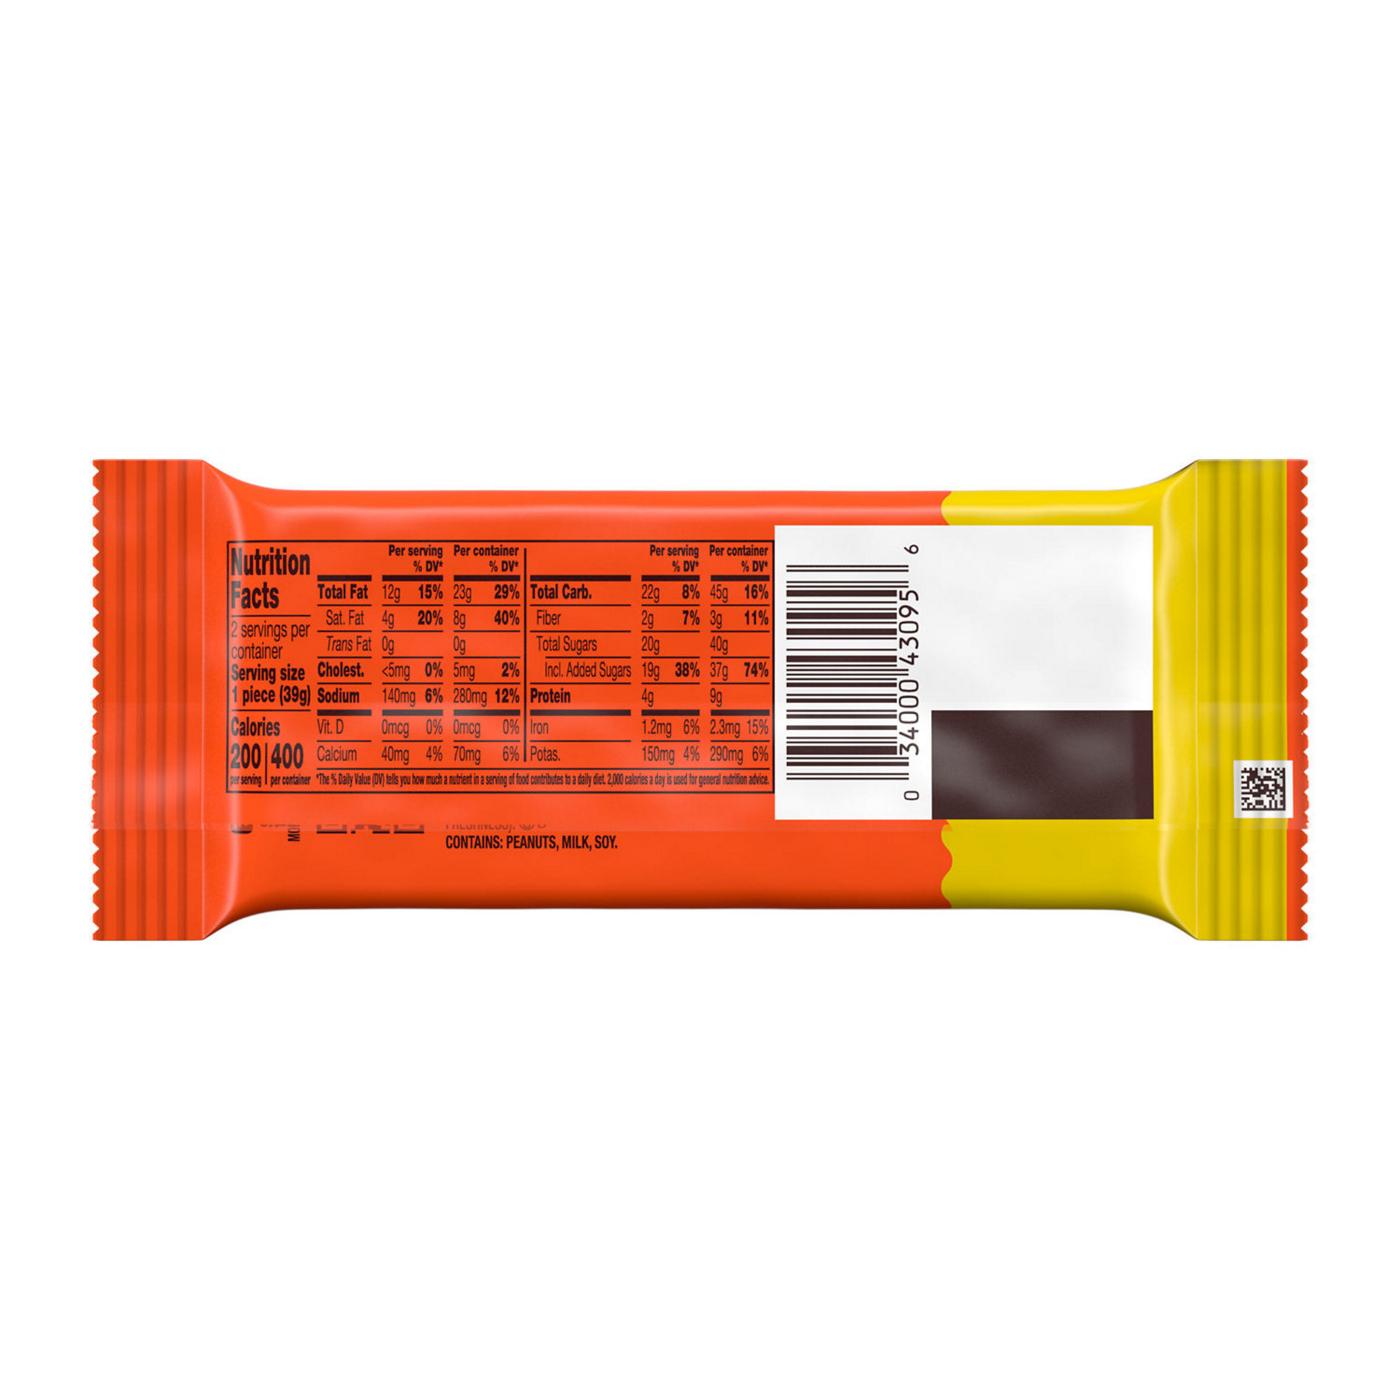 Reese's Big Cup Milk Chocolate Peanut Butter Candy - King Size; image 3 of 5